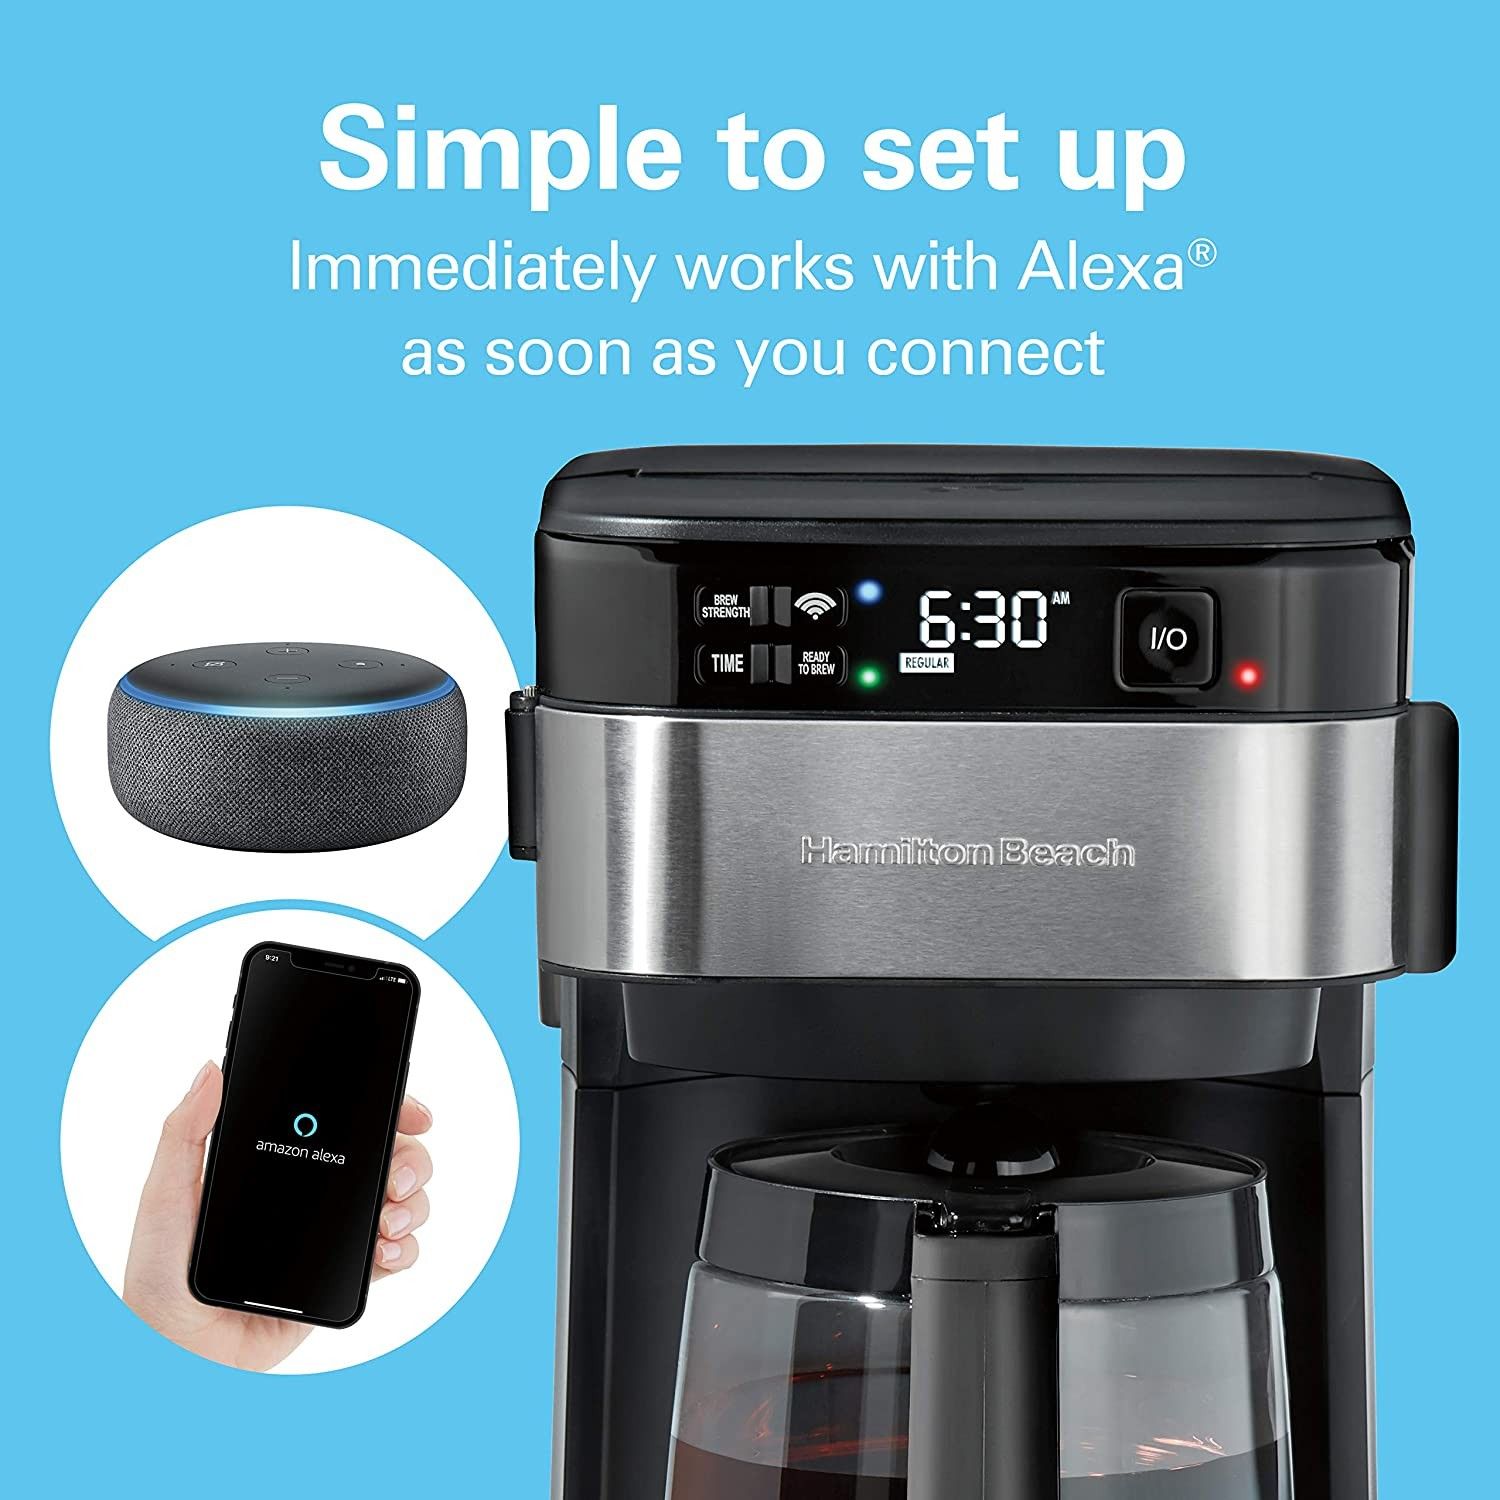 The Hamilton Beach Smart 12 Cup Coffee Maker with an Echo Dot and smartphone.